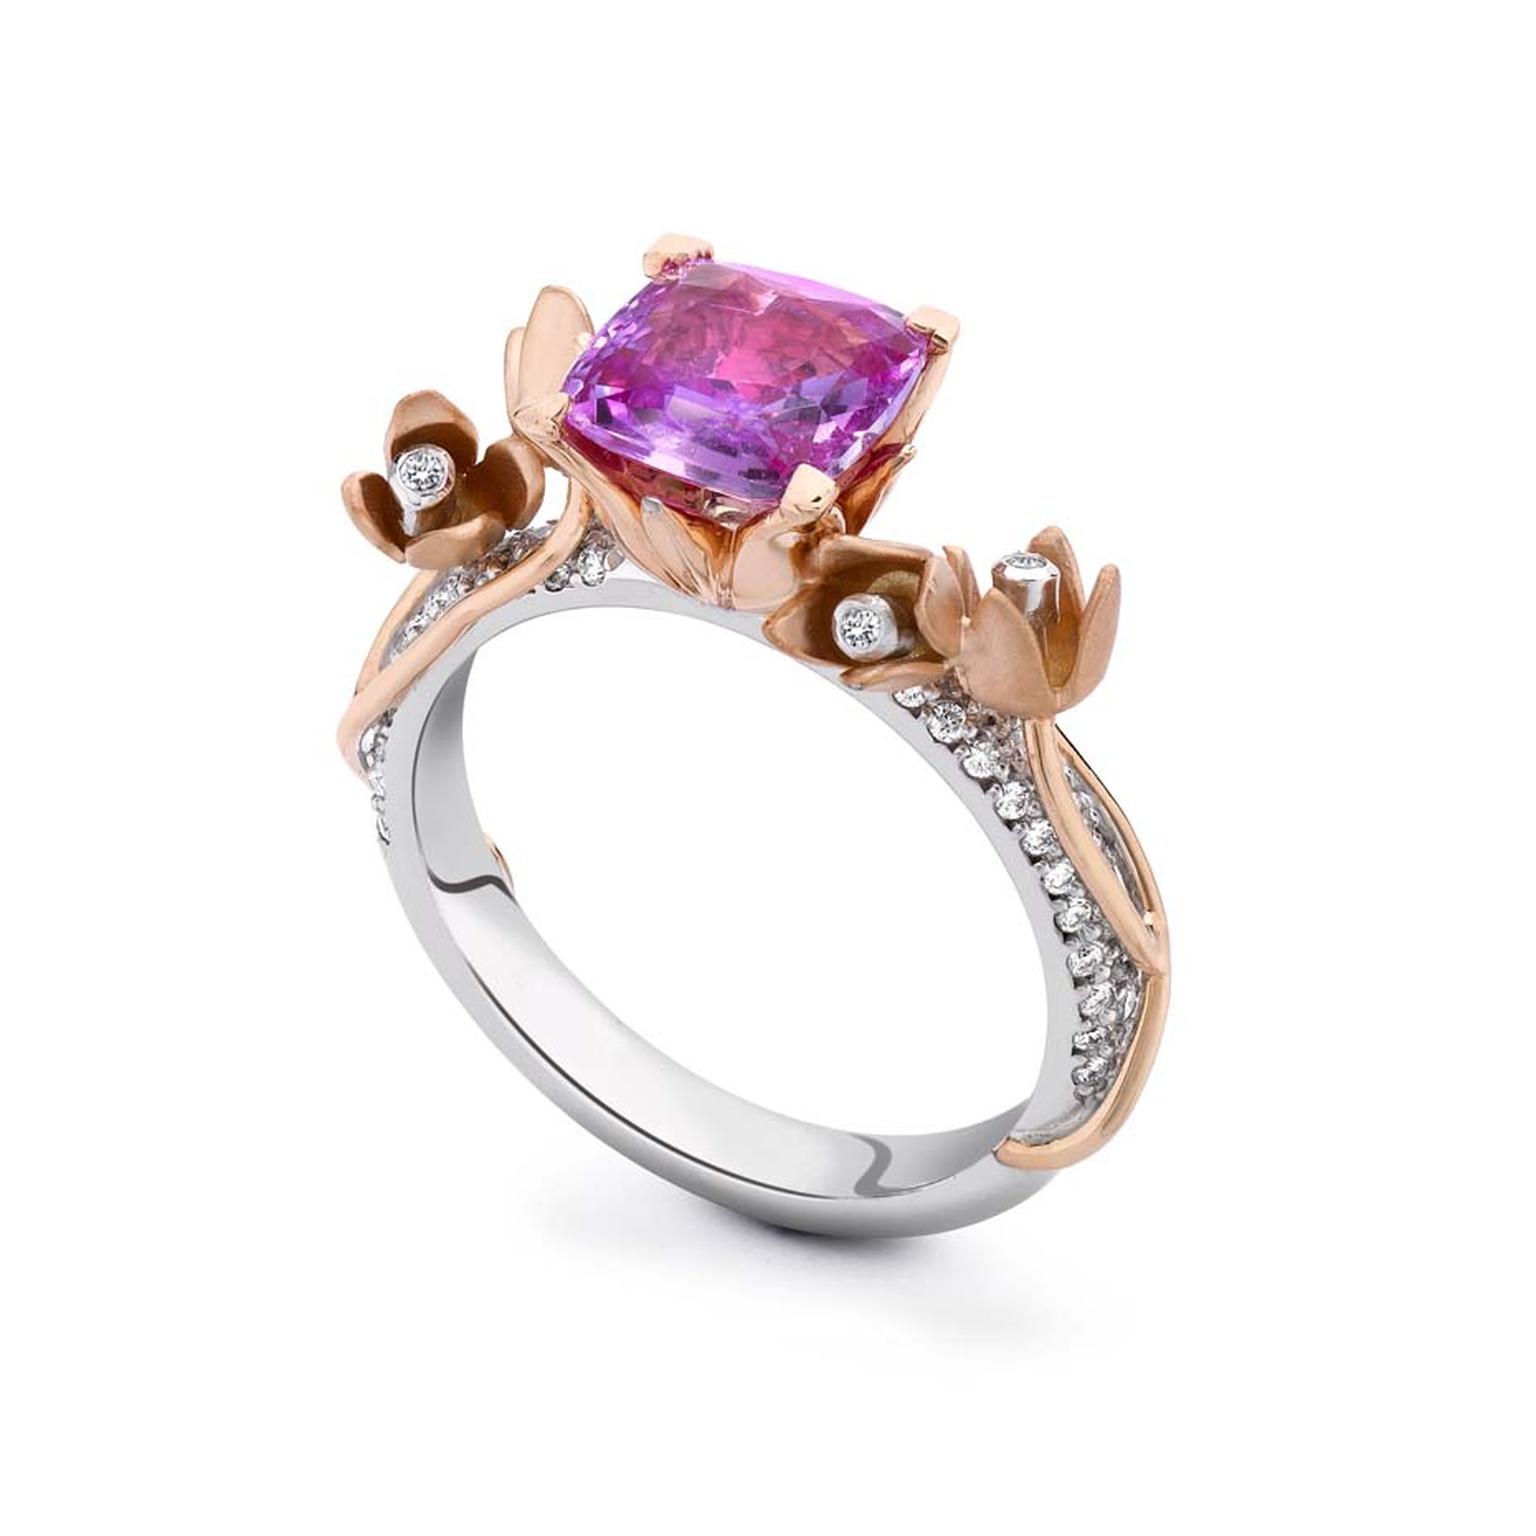 Theo Fennell engagement ring featuring a cushion-cut pink sapphire nestled in a rose gold floral setting on a white gold pavé band.